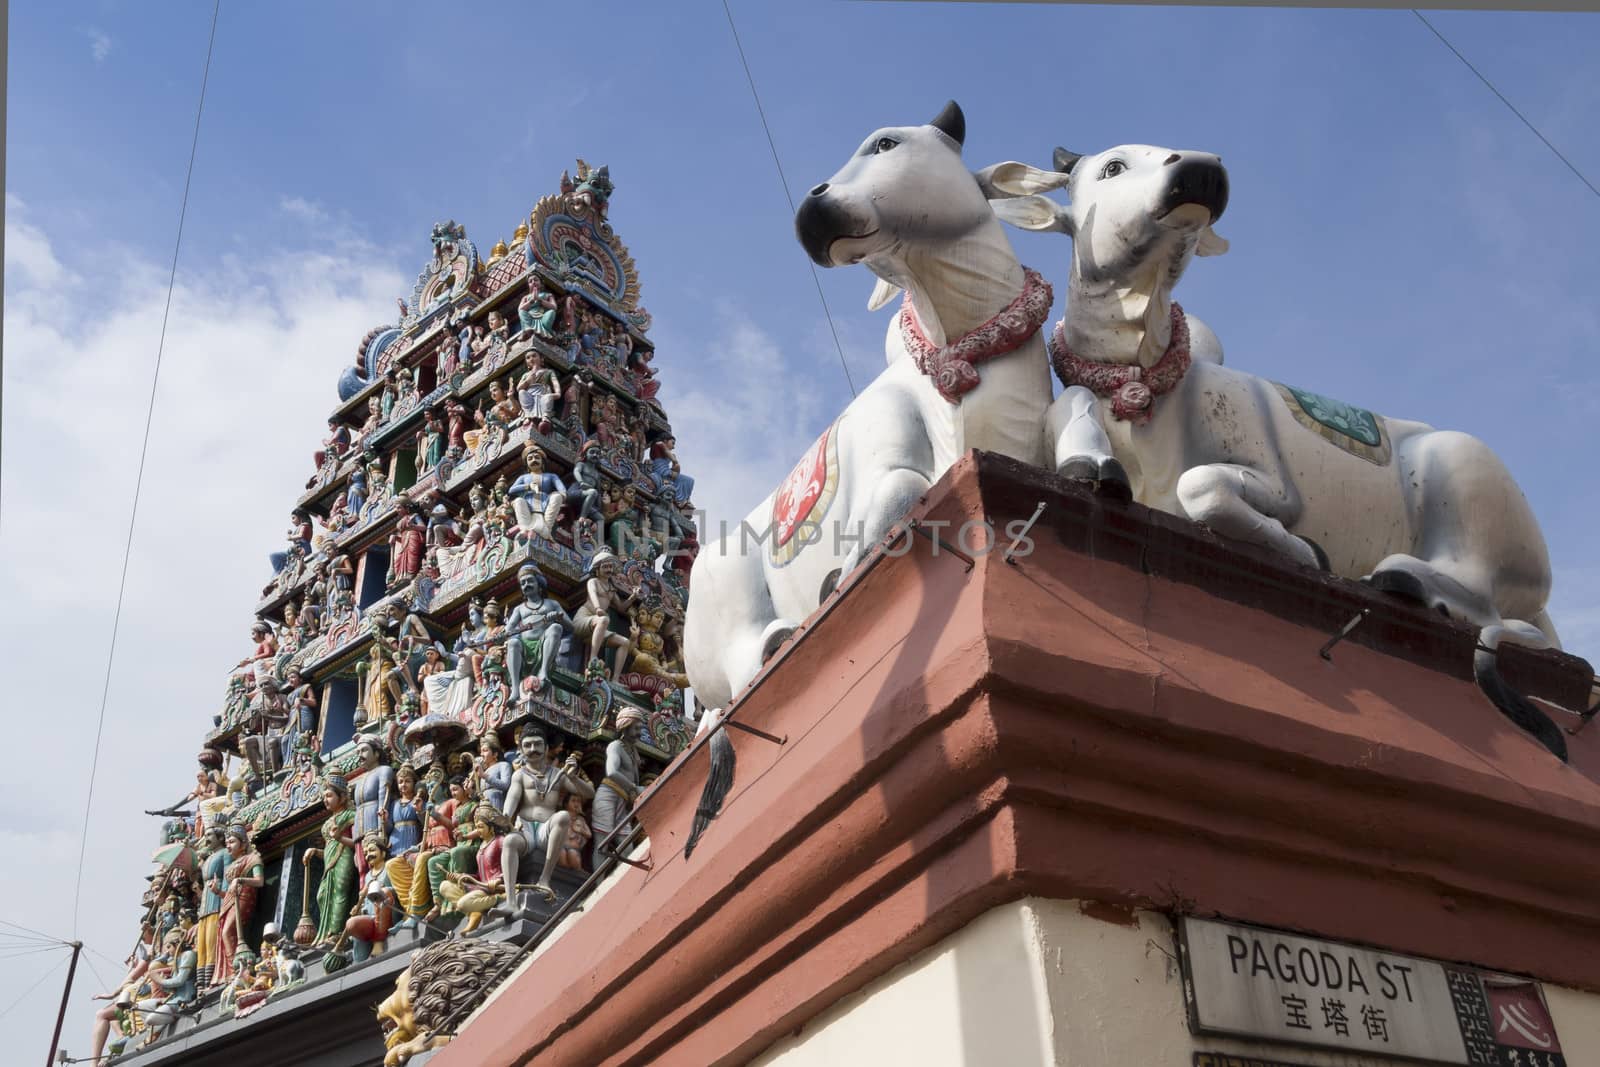 exterior fragment of Sri Mariamman Temple located in Chinatown with focus on cow figures. This temple is oldest and most famous Hindu temple in Singapore.